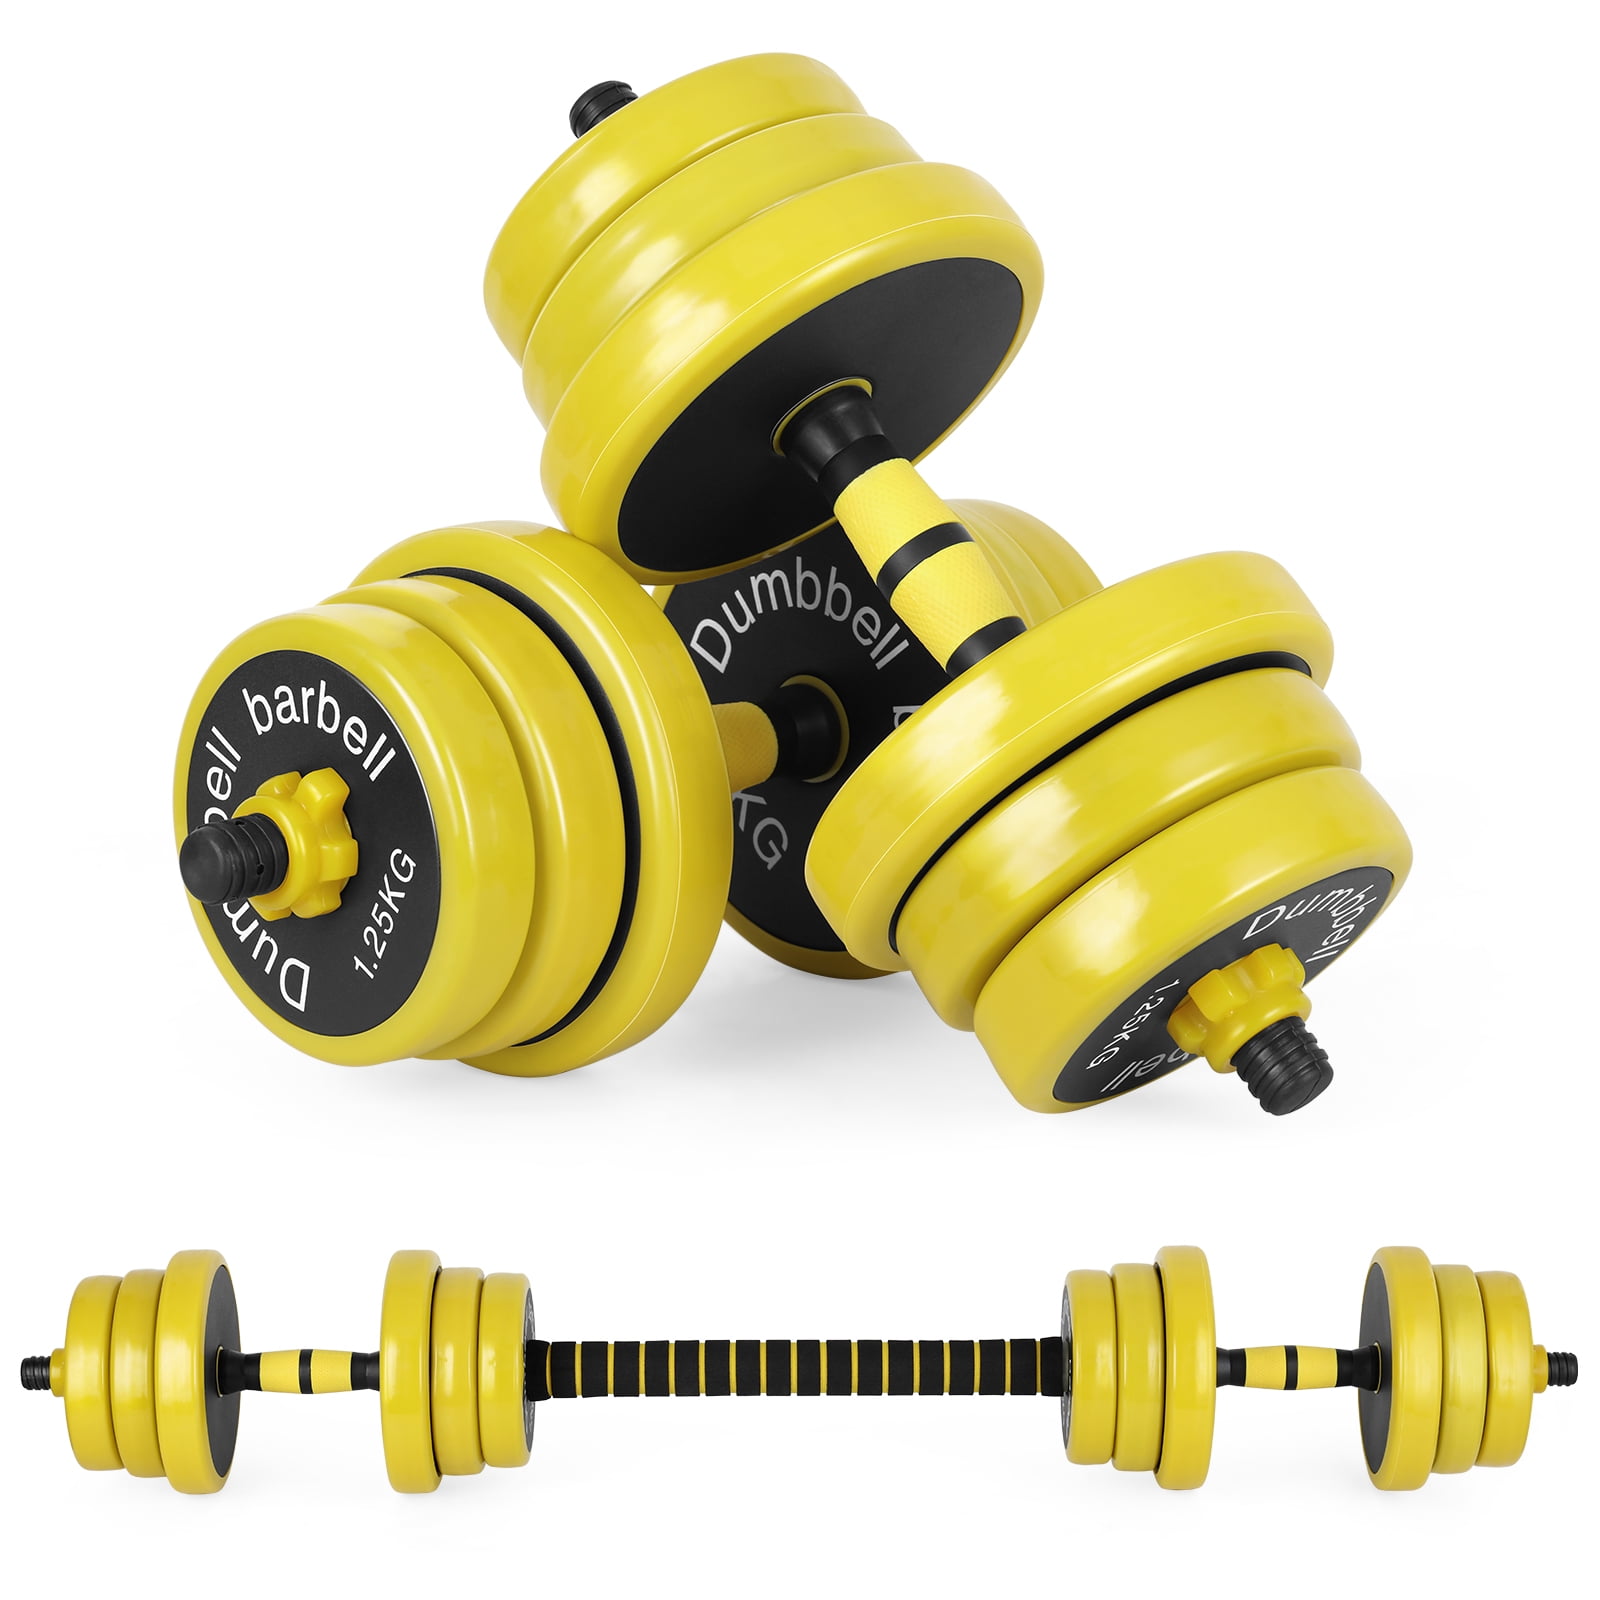 Suit Fitness Dumbbells Set Free Weights Adjustable Weight to 33-88lbs Home Fitness Equipment for Men and Women Gym Dumbbell Sets 30,40,60,80lbs 